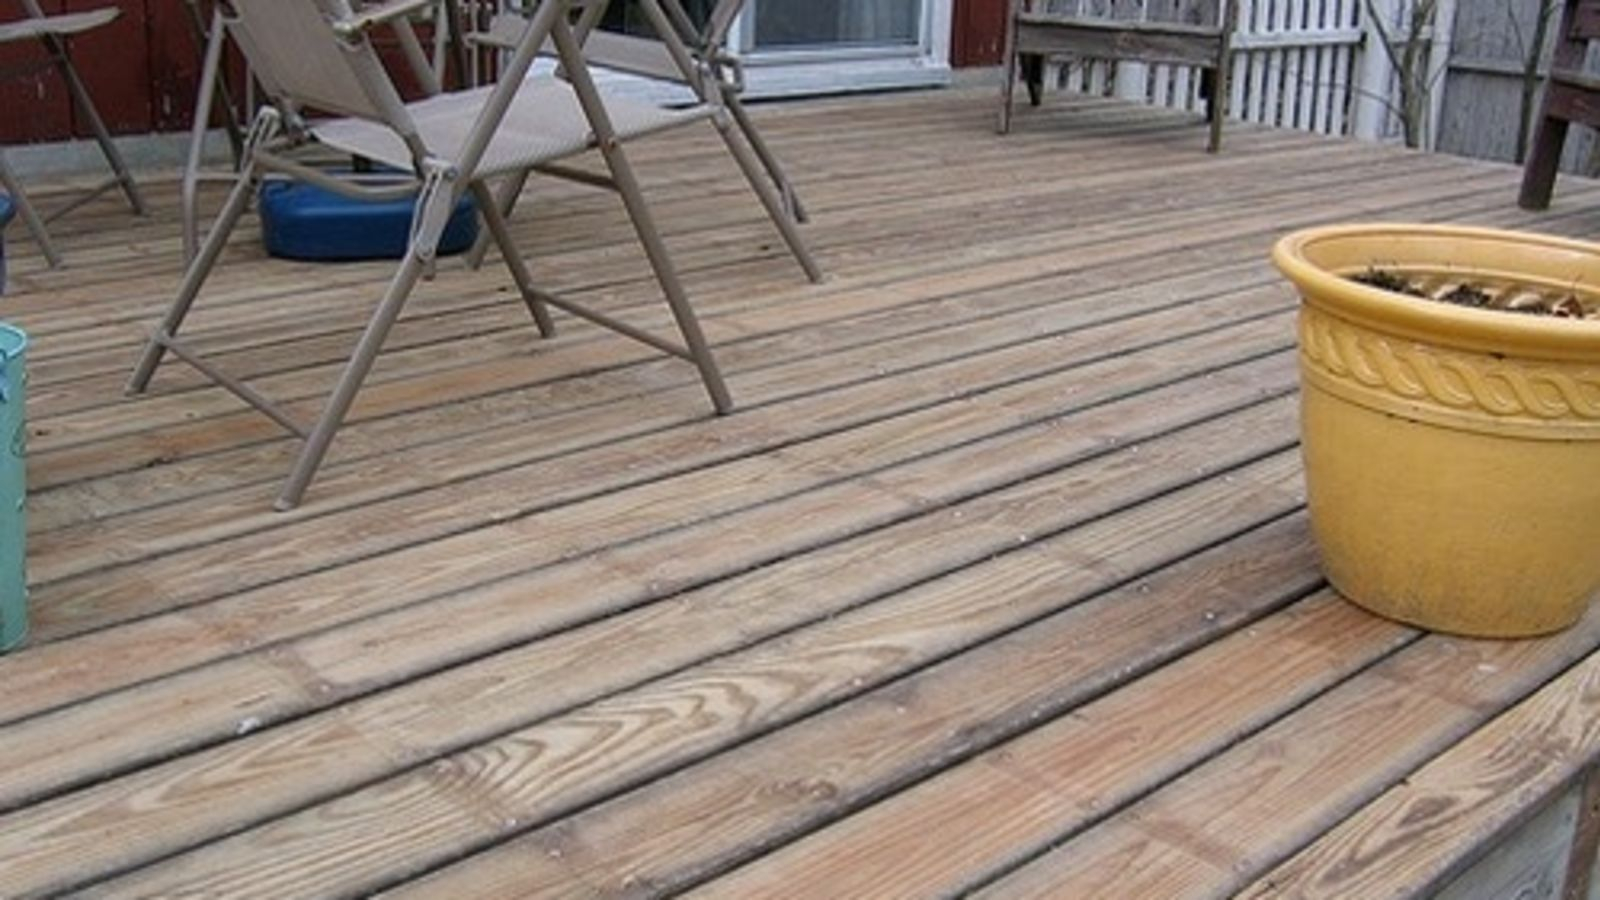 Flip Your Old Deck Boards Before Shelling Out For A New Deck with regard to dimensions 1600 X 900